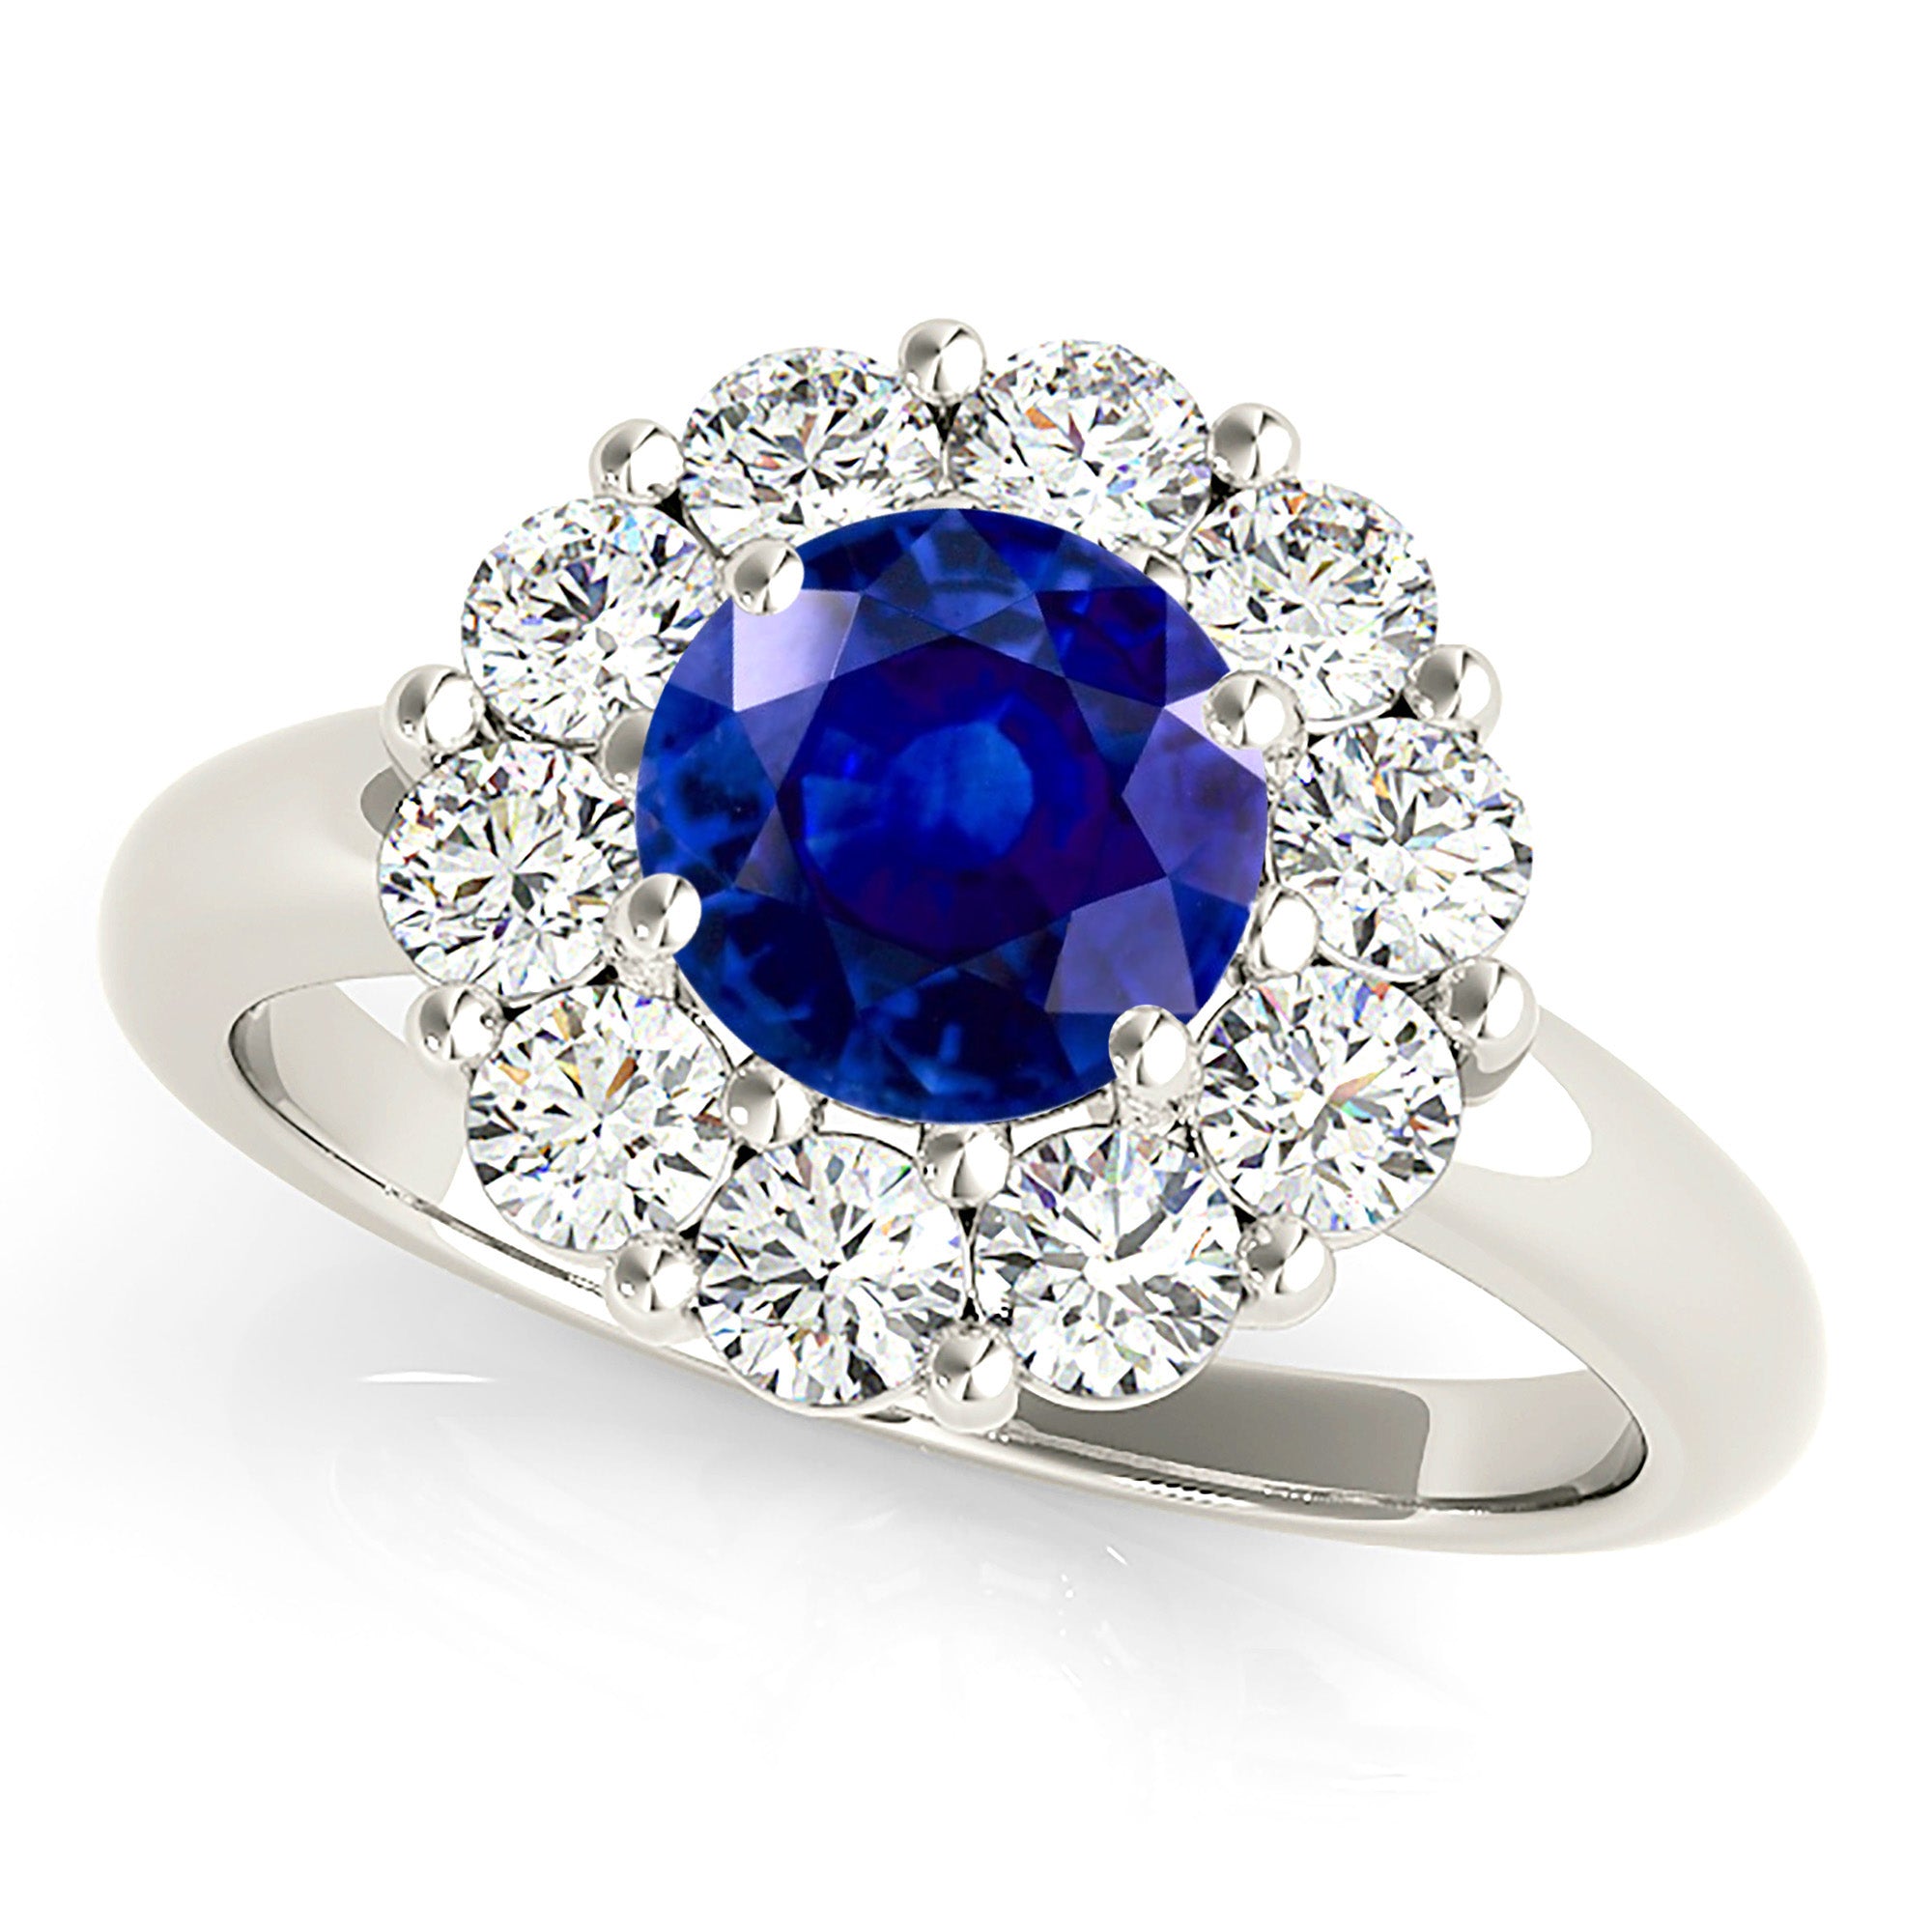 1.80 ct. Genuine Blue Sapphire Halo Ring with 1.15 ctw. Diamonds on Halo-in 14K/18K White, Yellow, Rose Gold and Platinum - Christmas Jewelry Gift -VIRABYANI